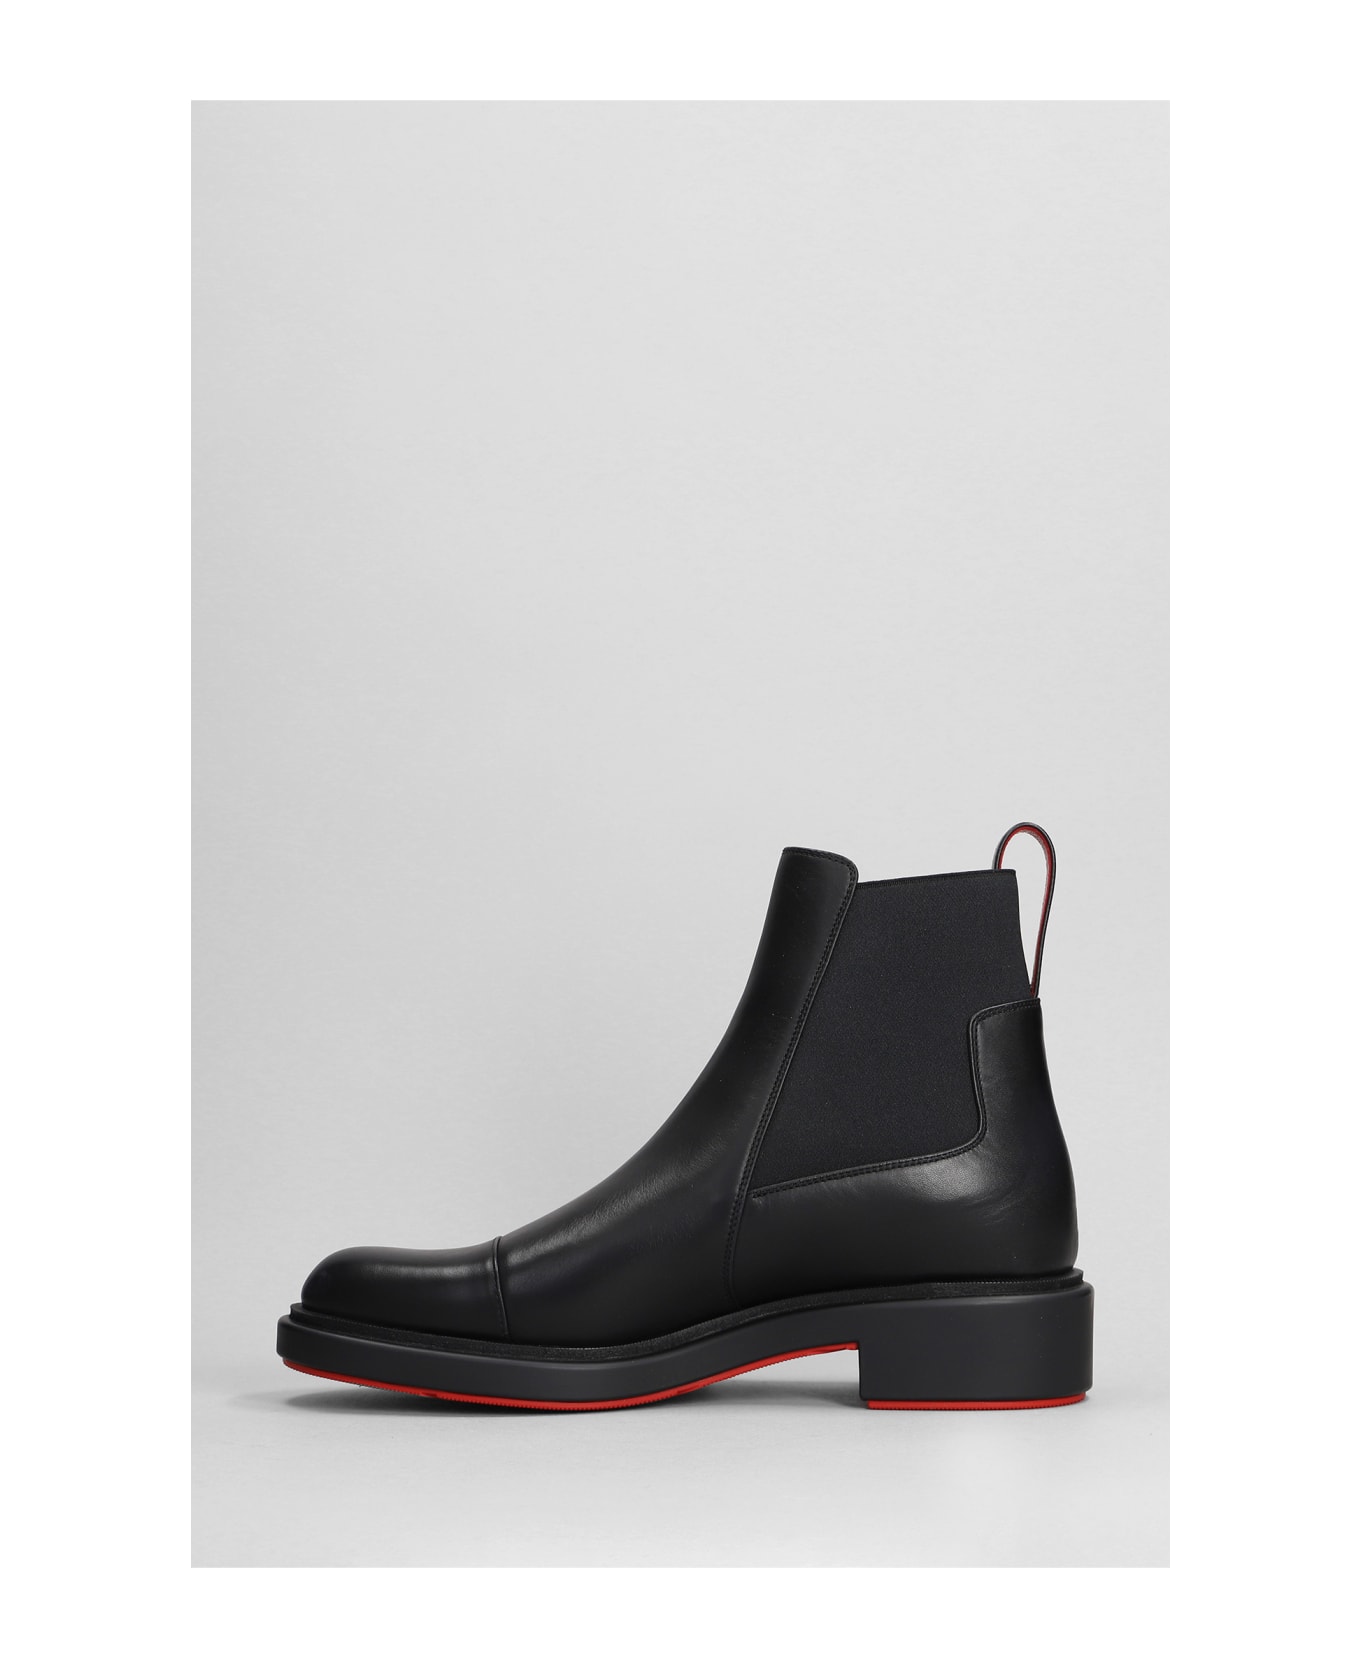 Christian Louboutin Urbino Ankle Boots In Black Leather - black